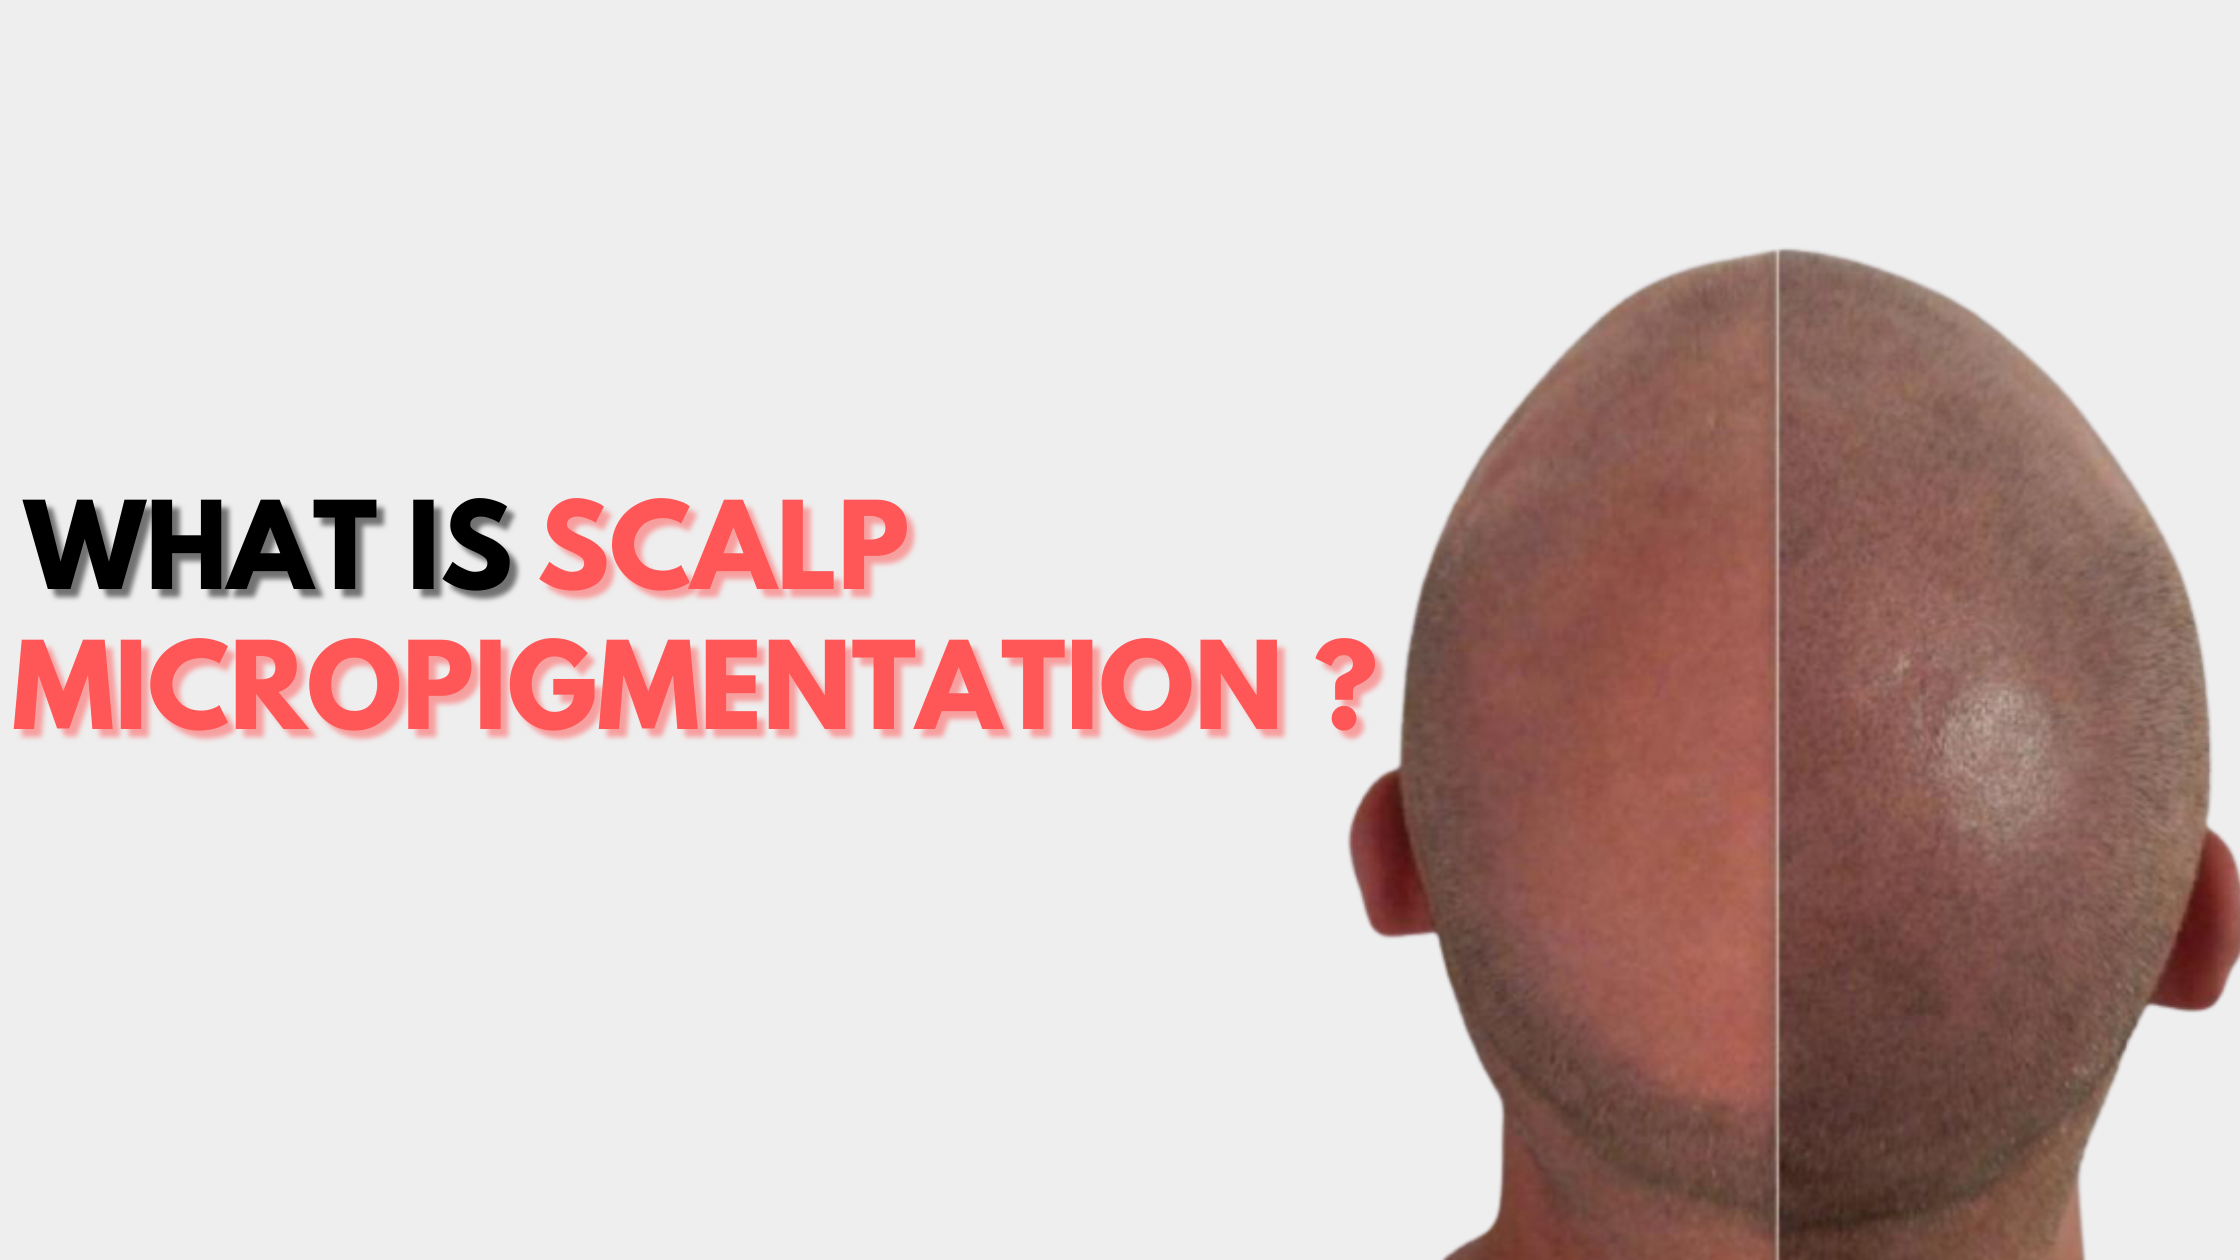 WHAT IS SCALP MICROPIGMENTATION